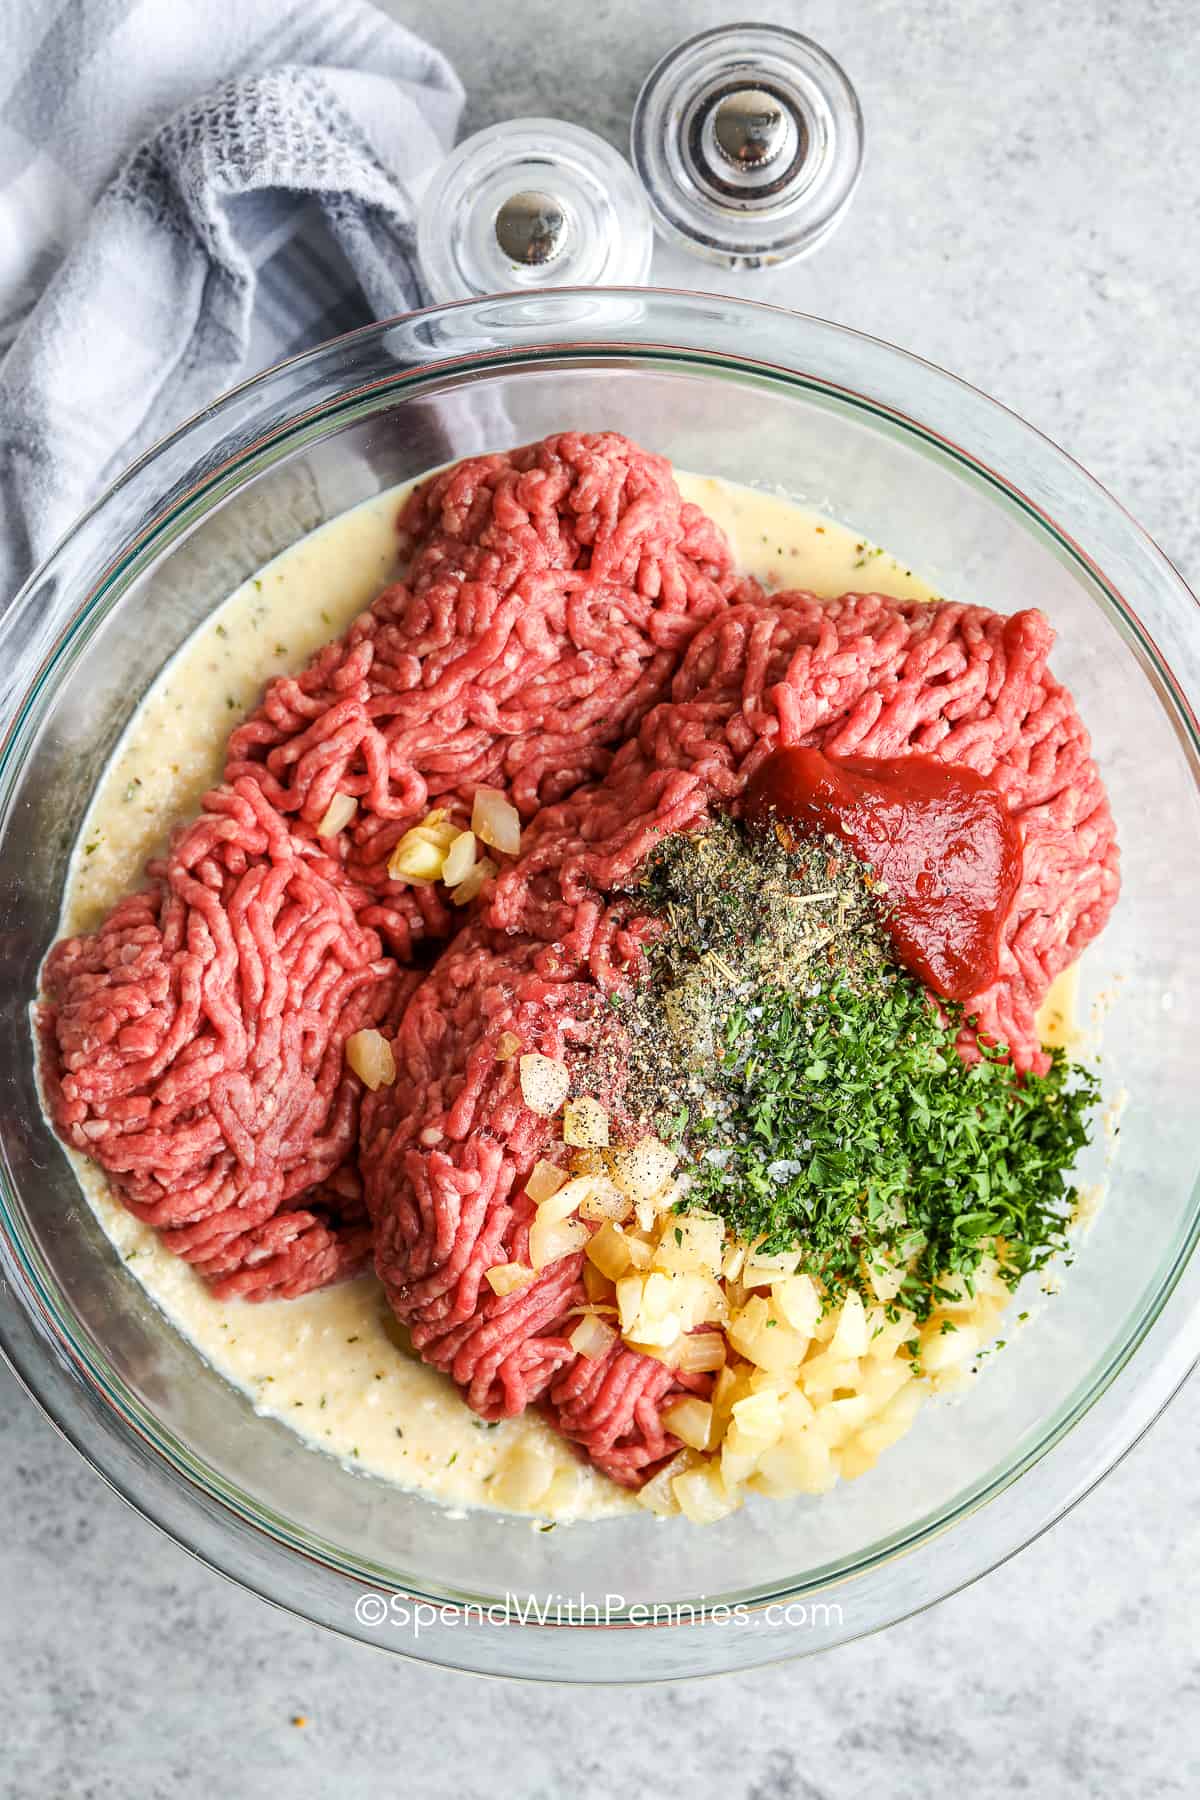 Ingredients in a glass bowl for a classic homemade meatloaf recipe